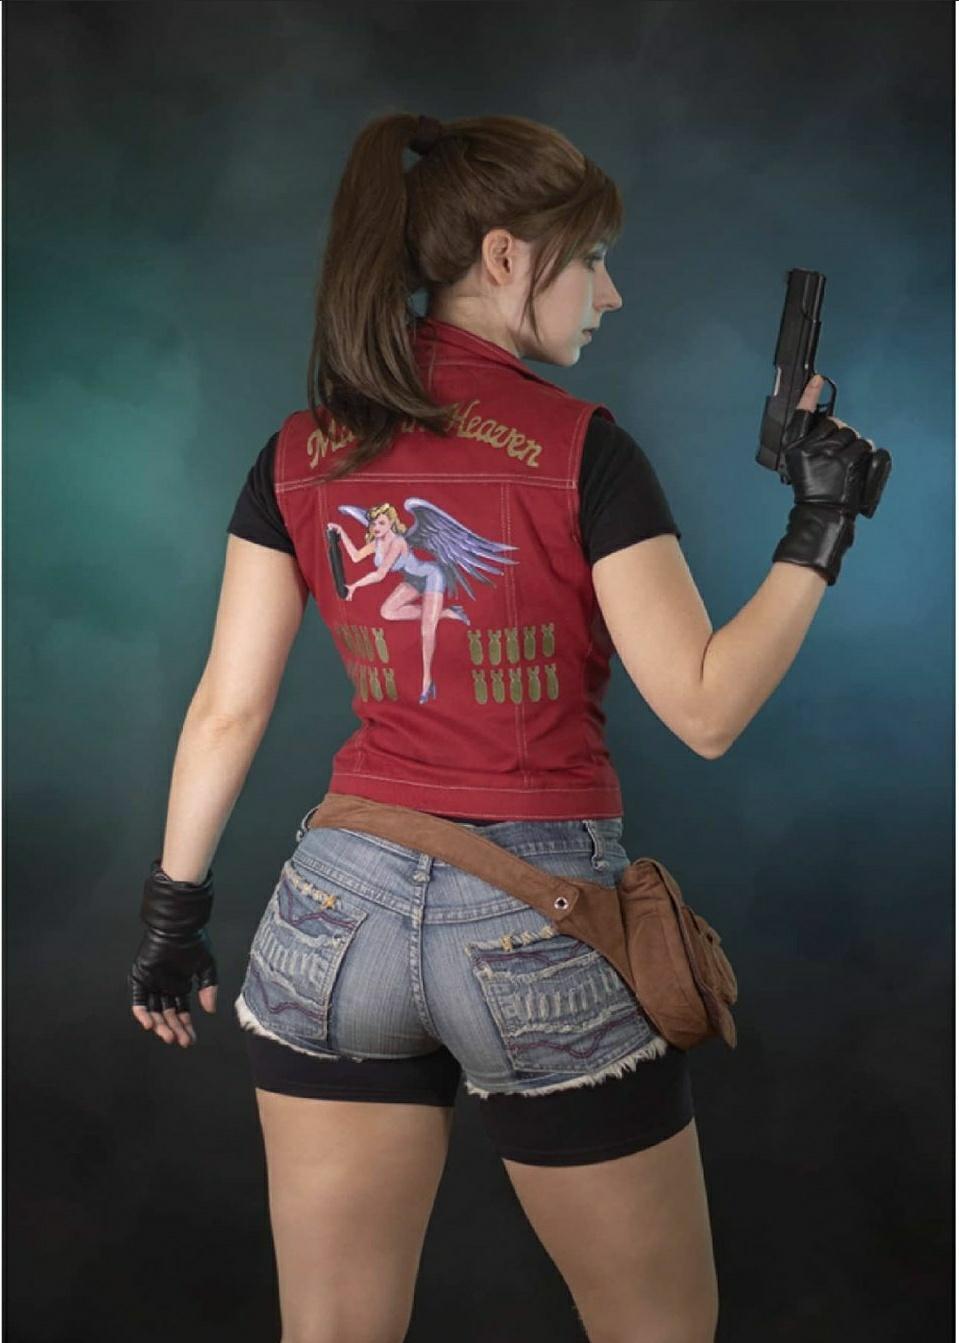 Best of Claire redfield butt